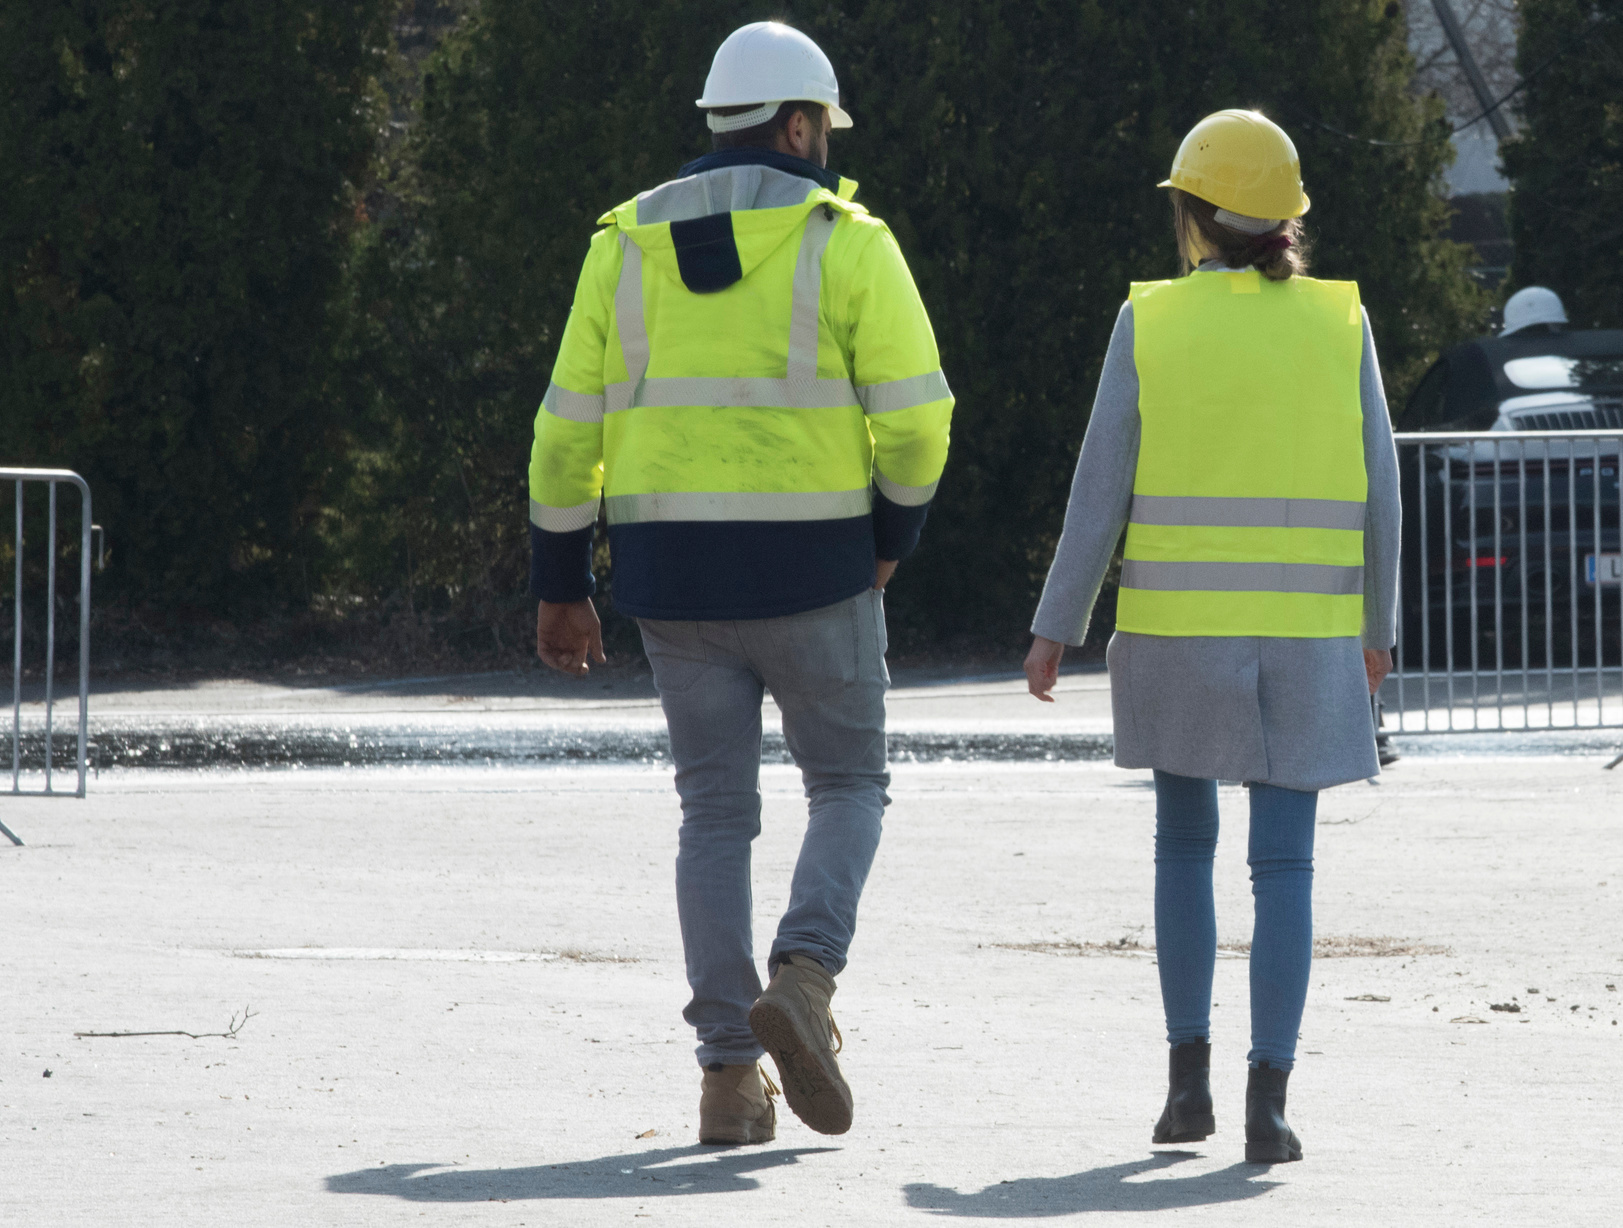 Workers in Green Safety Vests Walking Outdoors